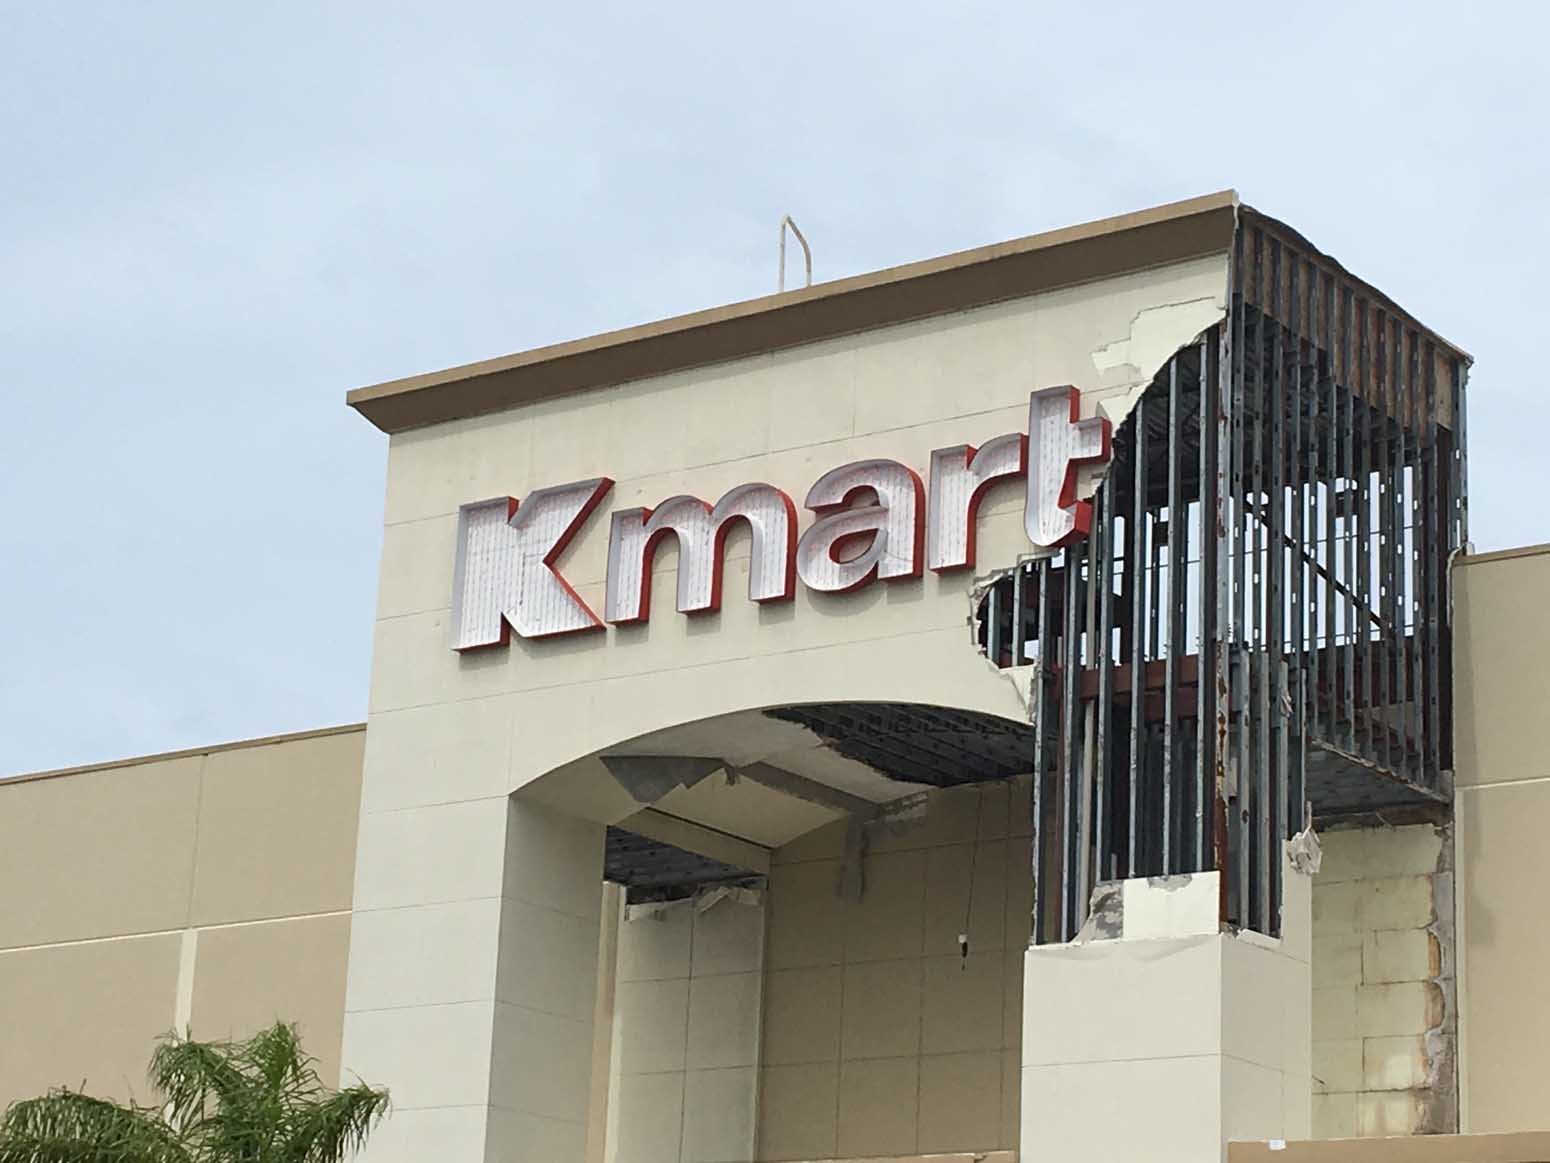 Kmart is now open but the sign damage is a reminder of Maria 